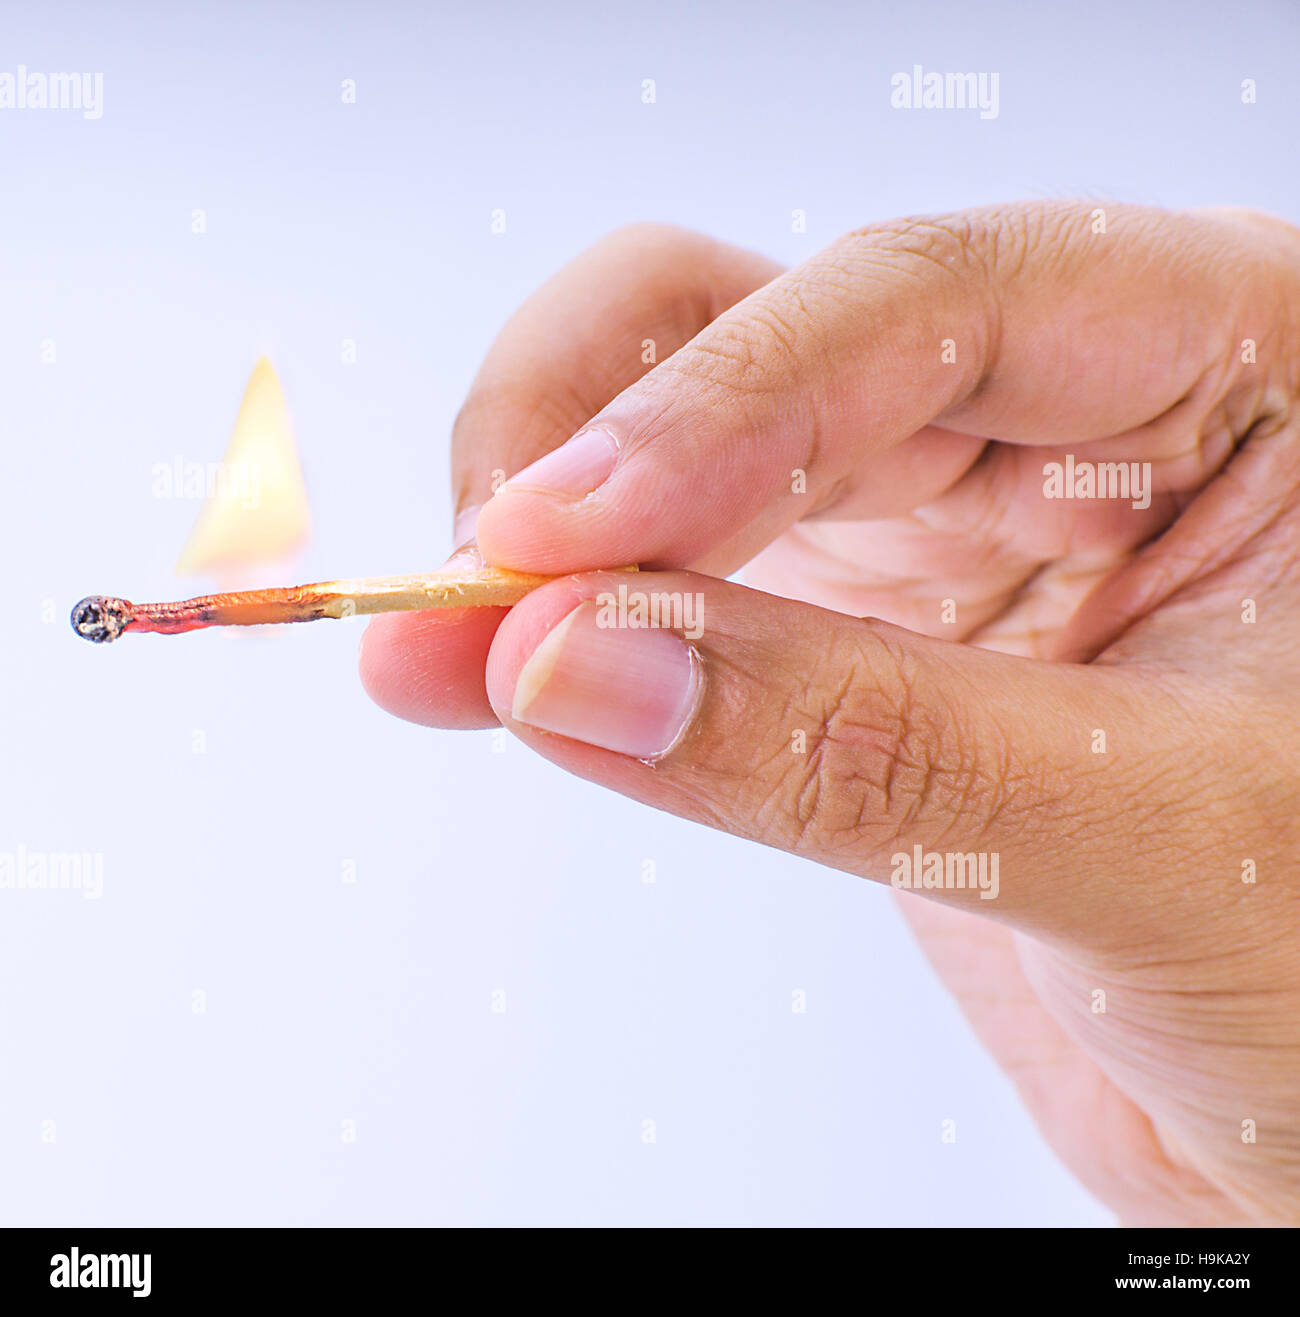 Hand holding a fired matchstick on a white background Stock Photo